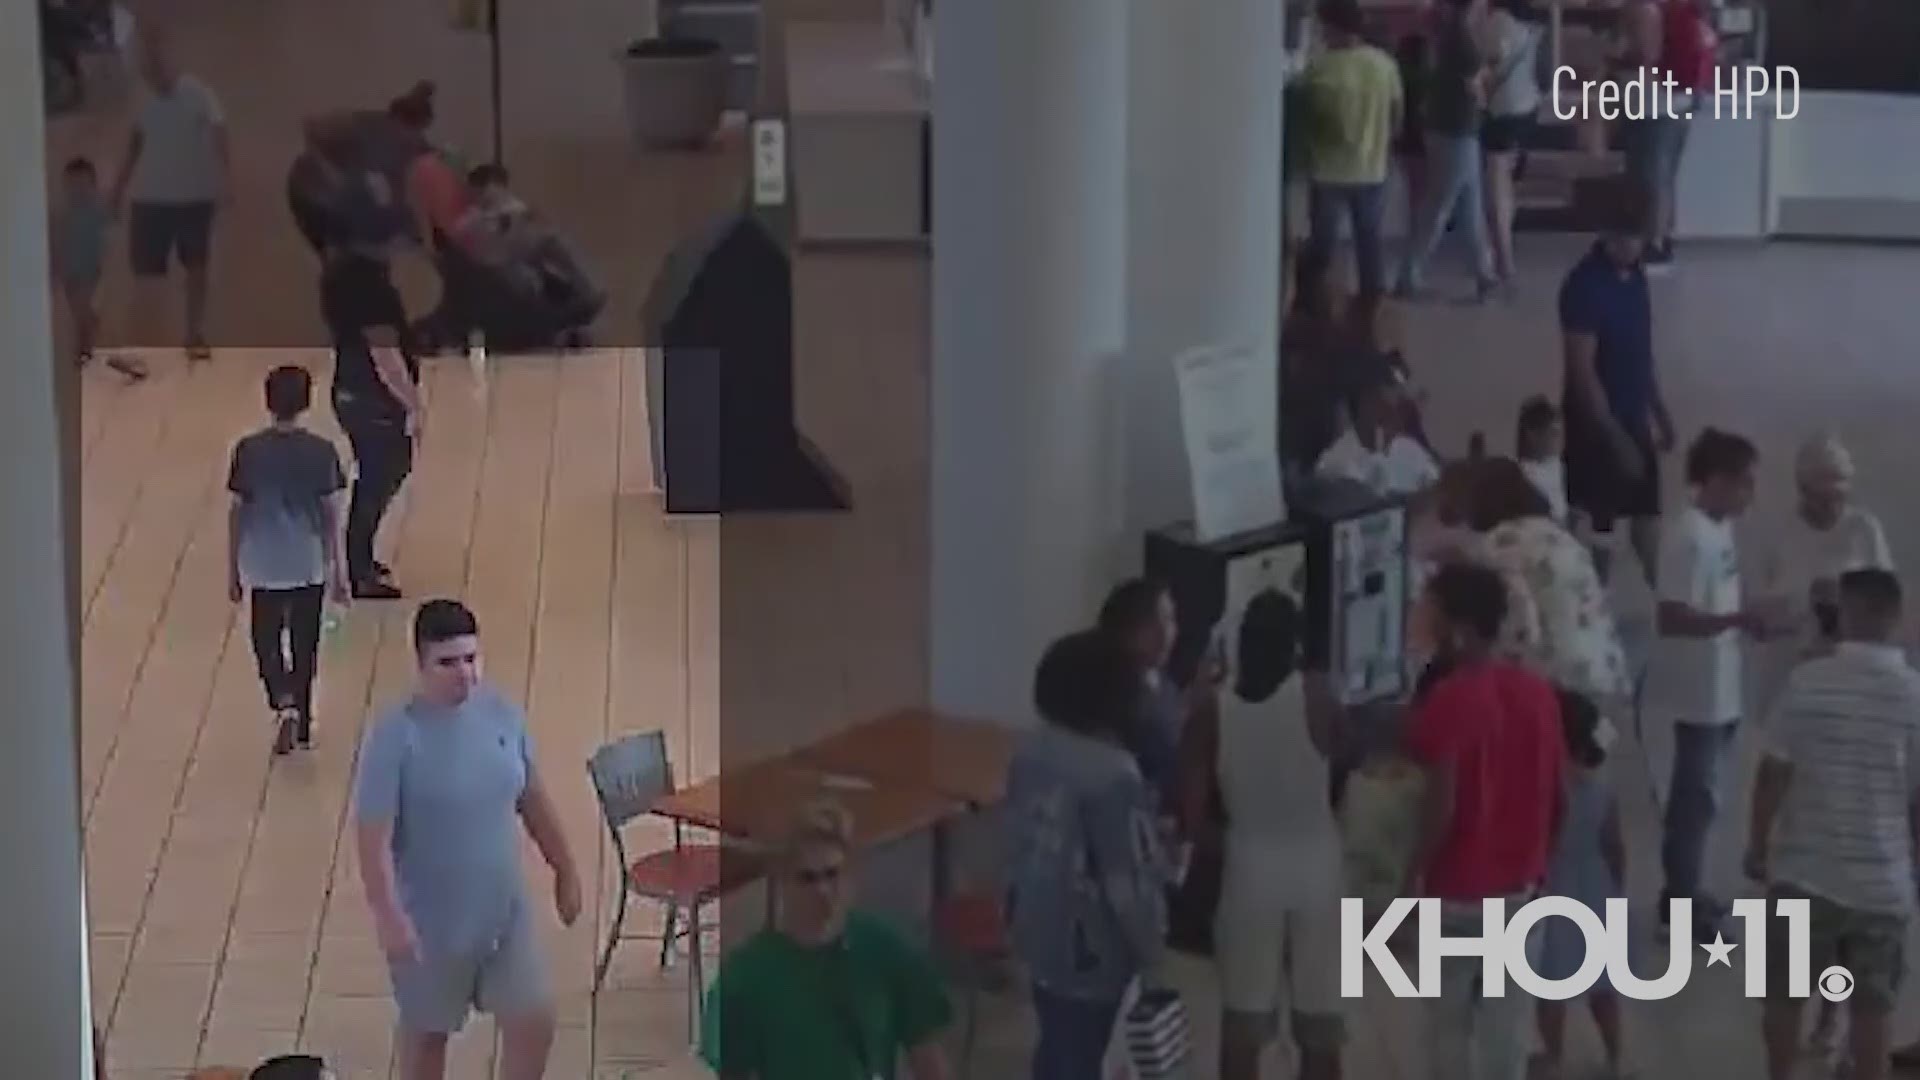 This is surveillance video of the person of interest (in green shirt) in Sunday's incident that panicked shoppers at Memorial City Mall. HPD is also seeking the ID of the male in the gray shirt. He may be an eyewitness or have additional knowledge.